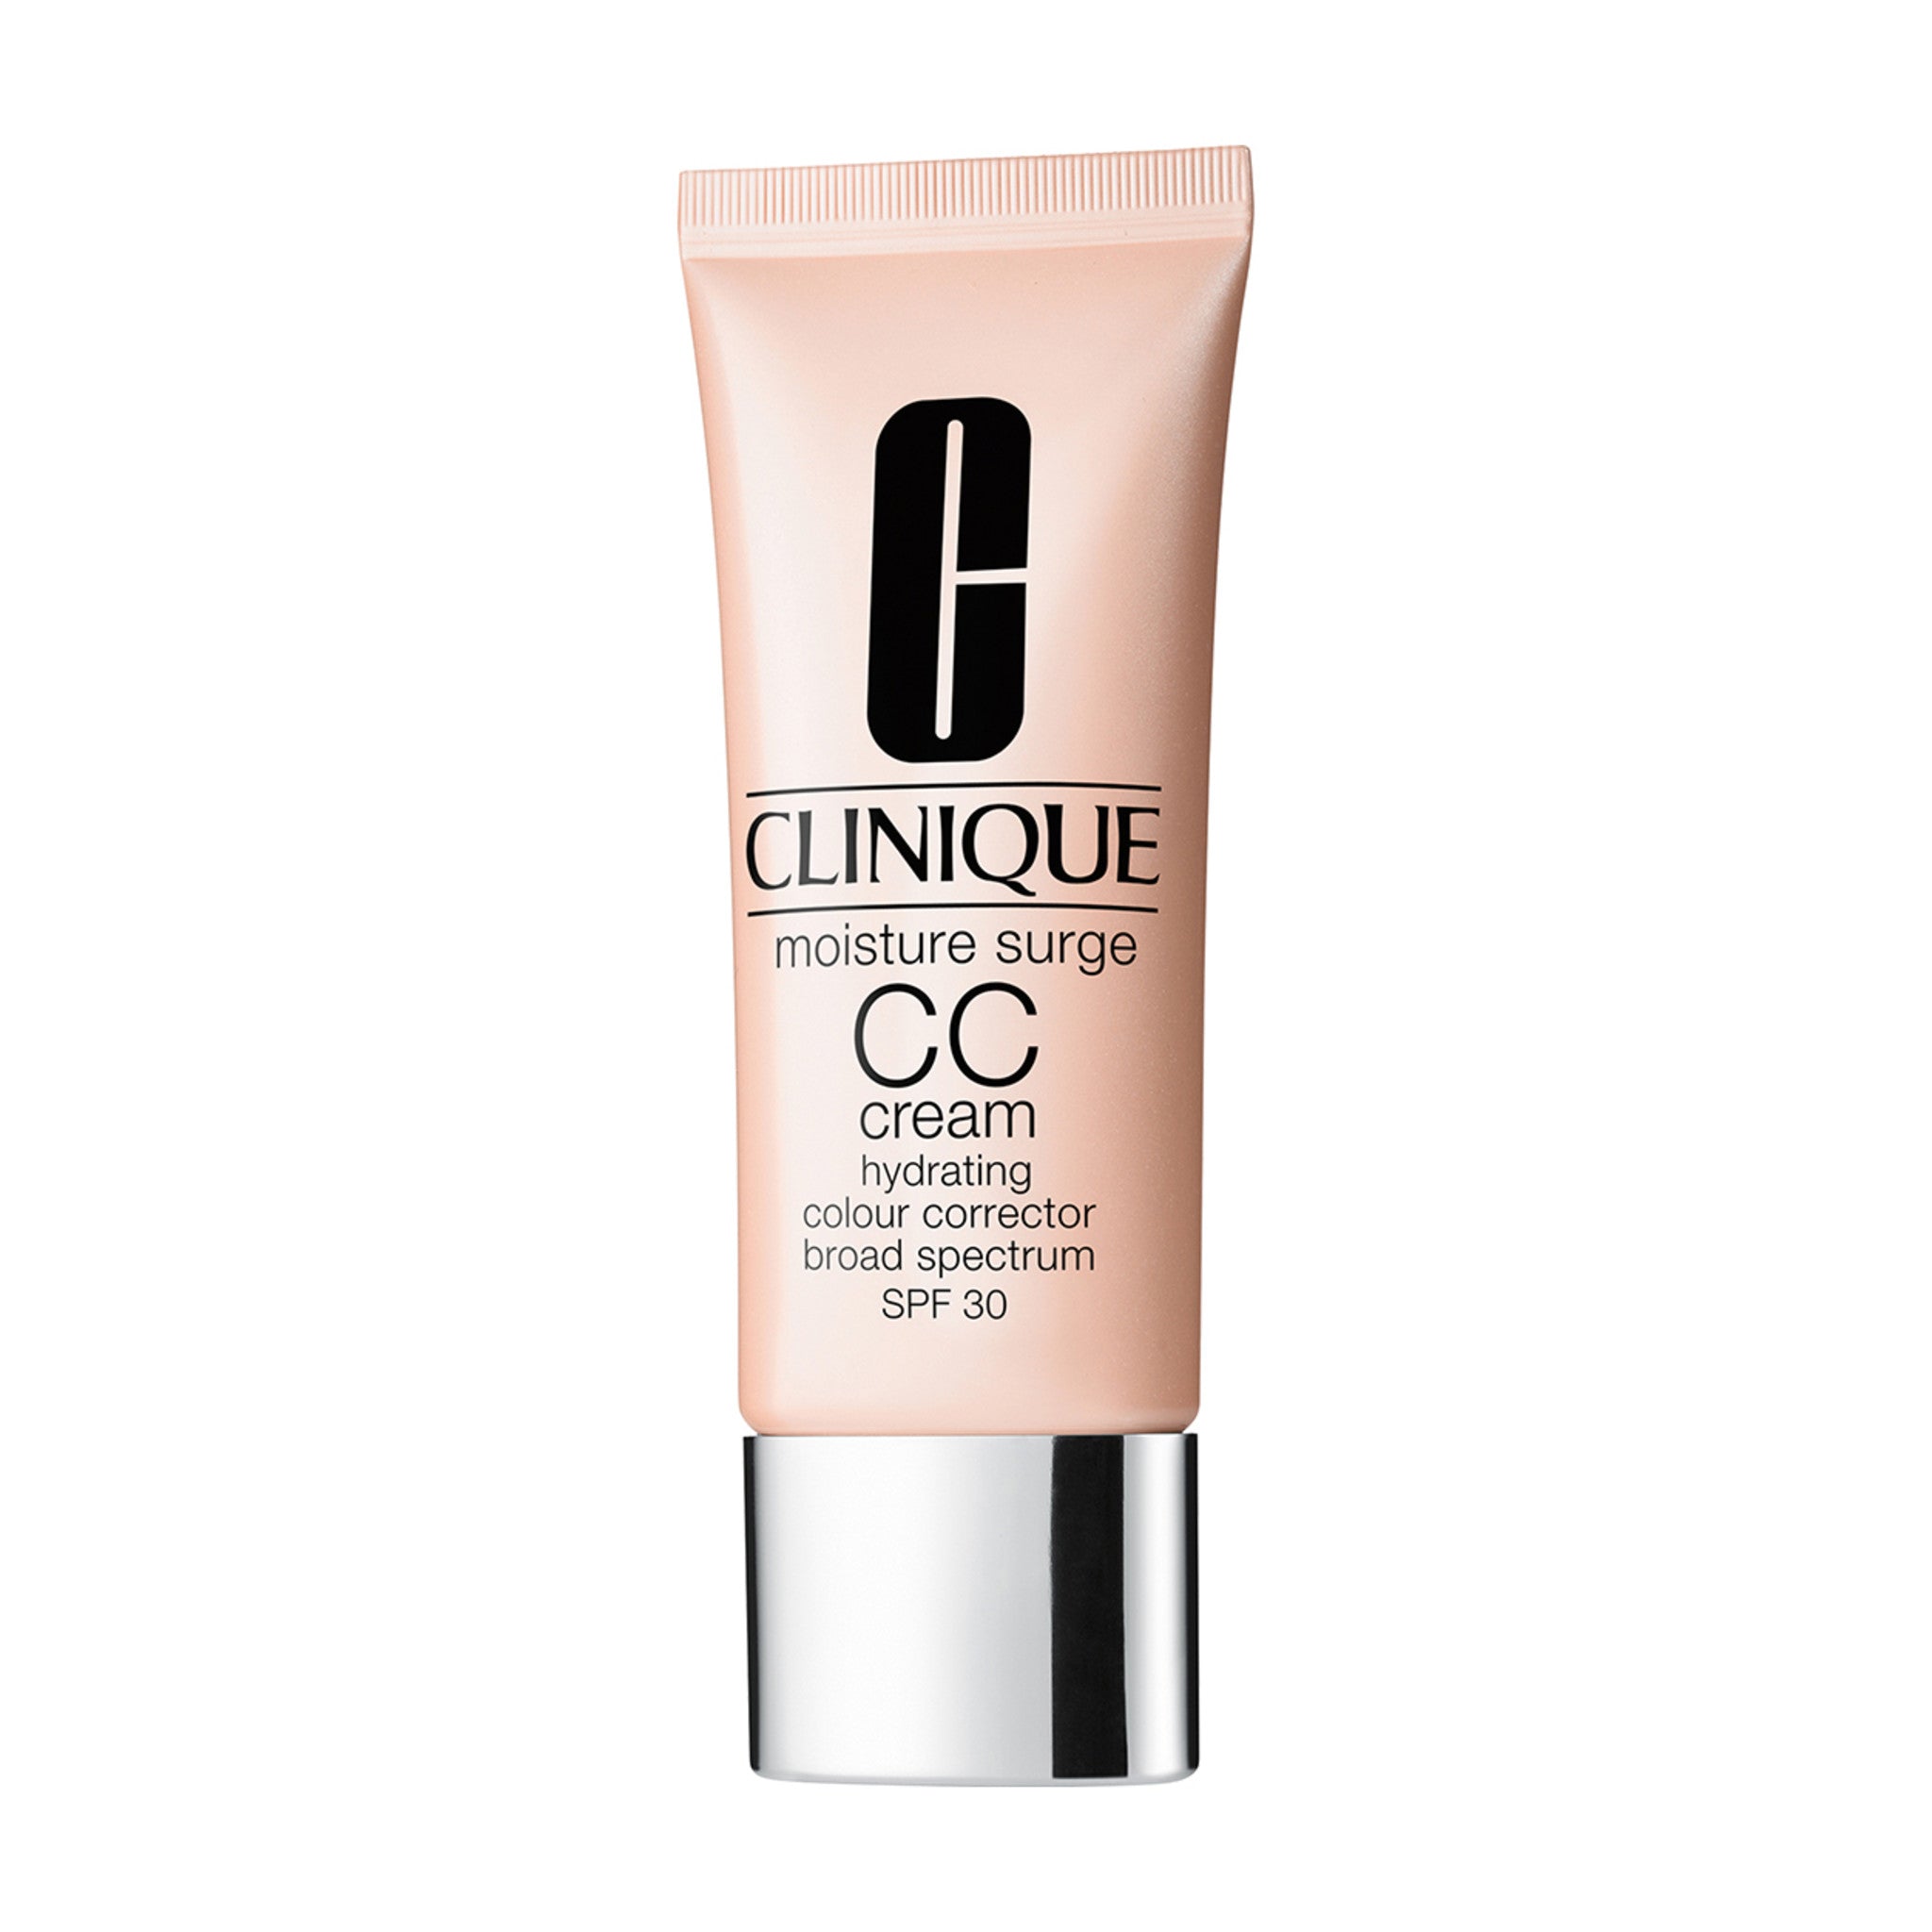 Clinique Moisture Surge CC Cream Hydrating Colour Corrector Broad Spectrum SPF 30 Color/Shade variant: Light main image. This product is for light complexions